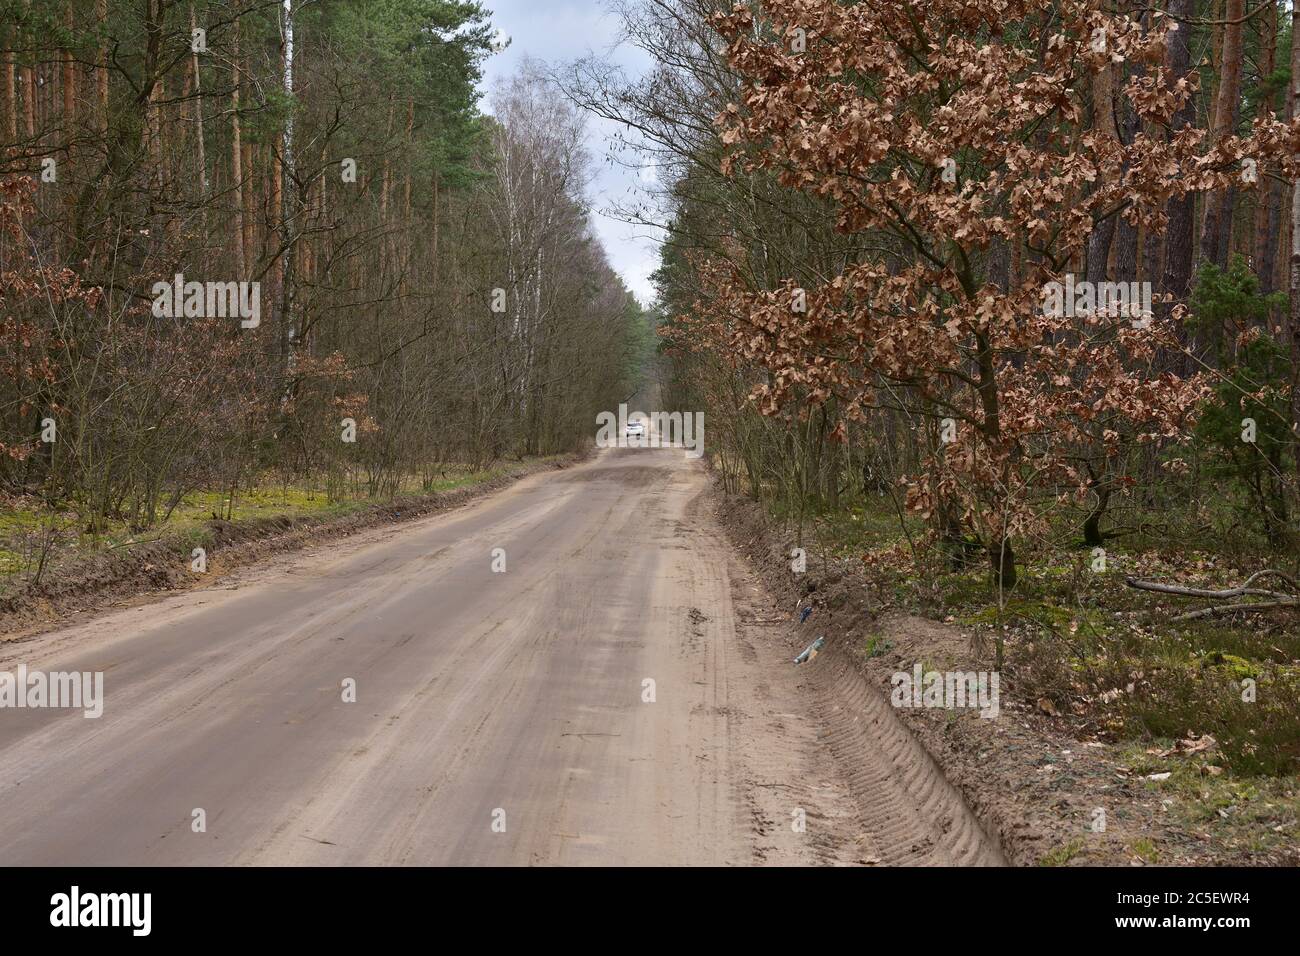 Forest road between trees in a wild forest. Clouds in the sky. Stock Photo